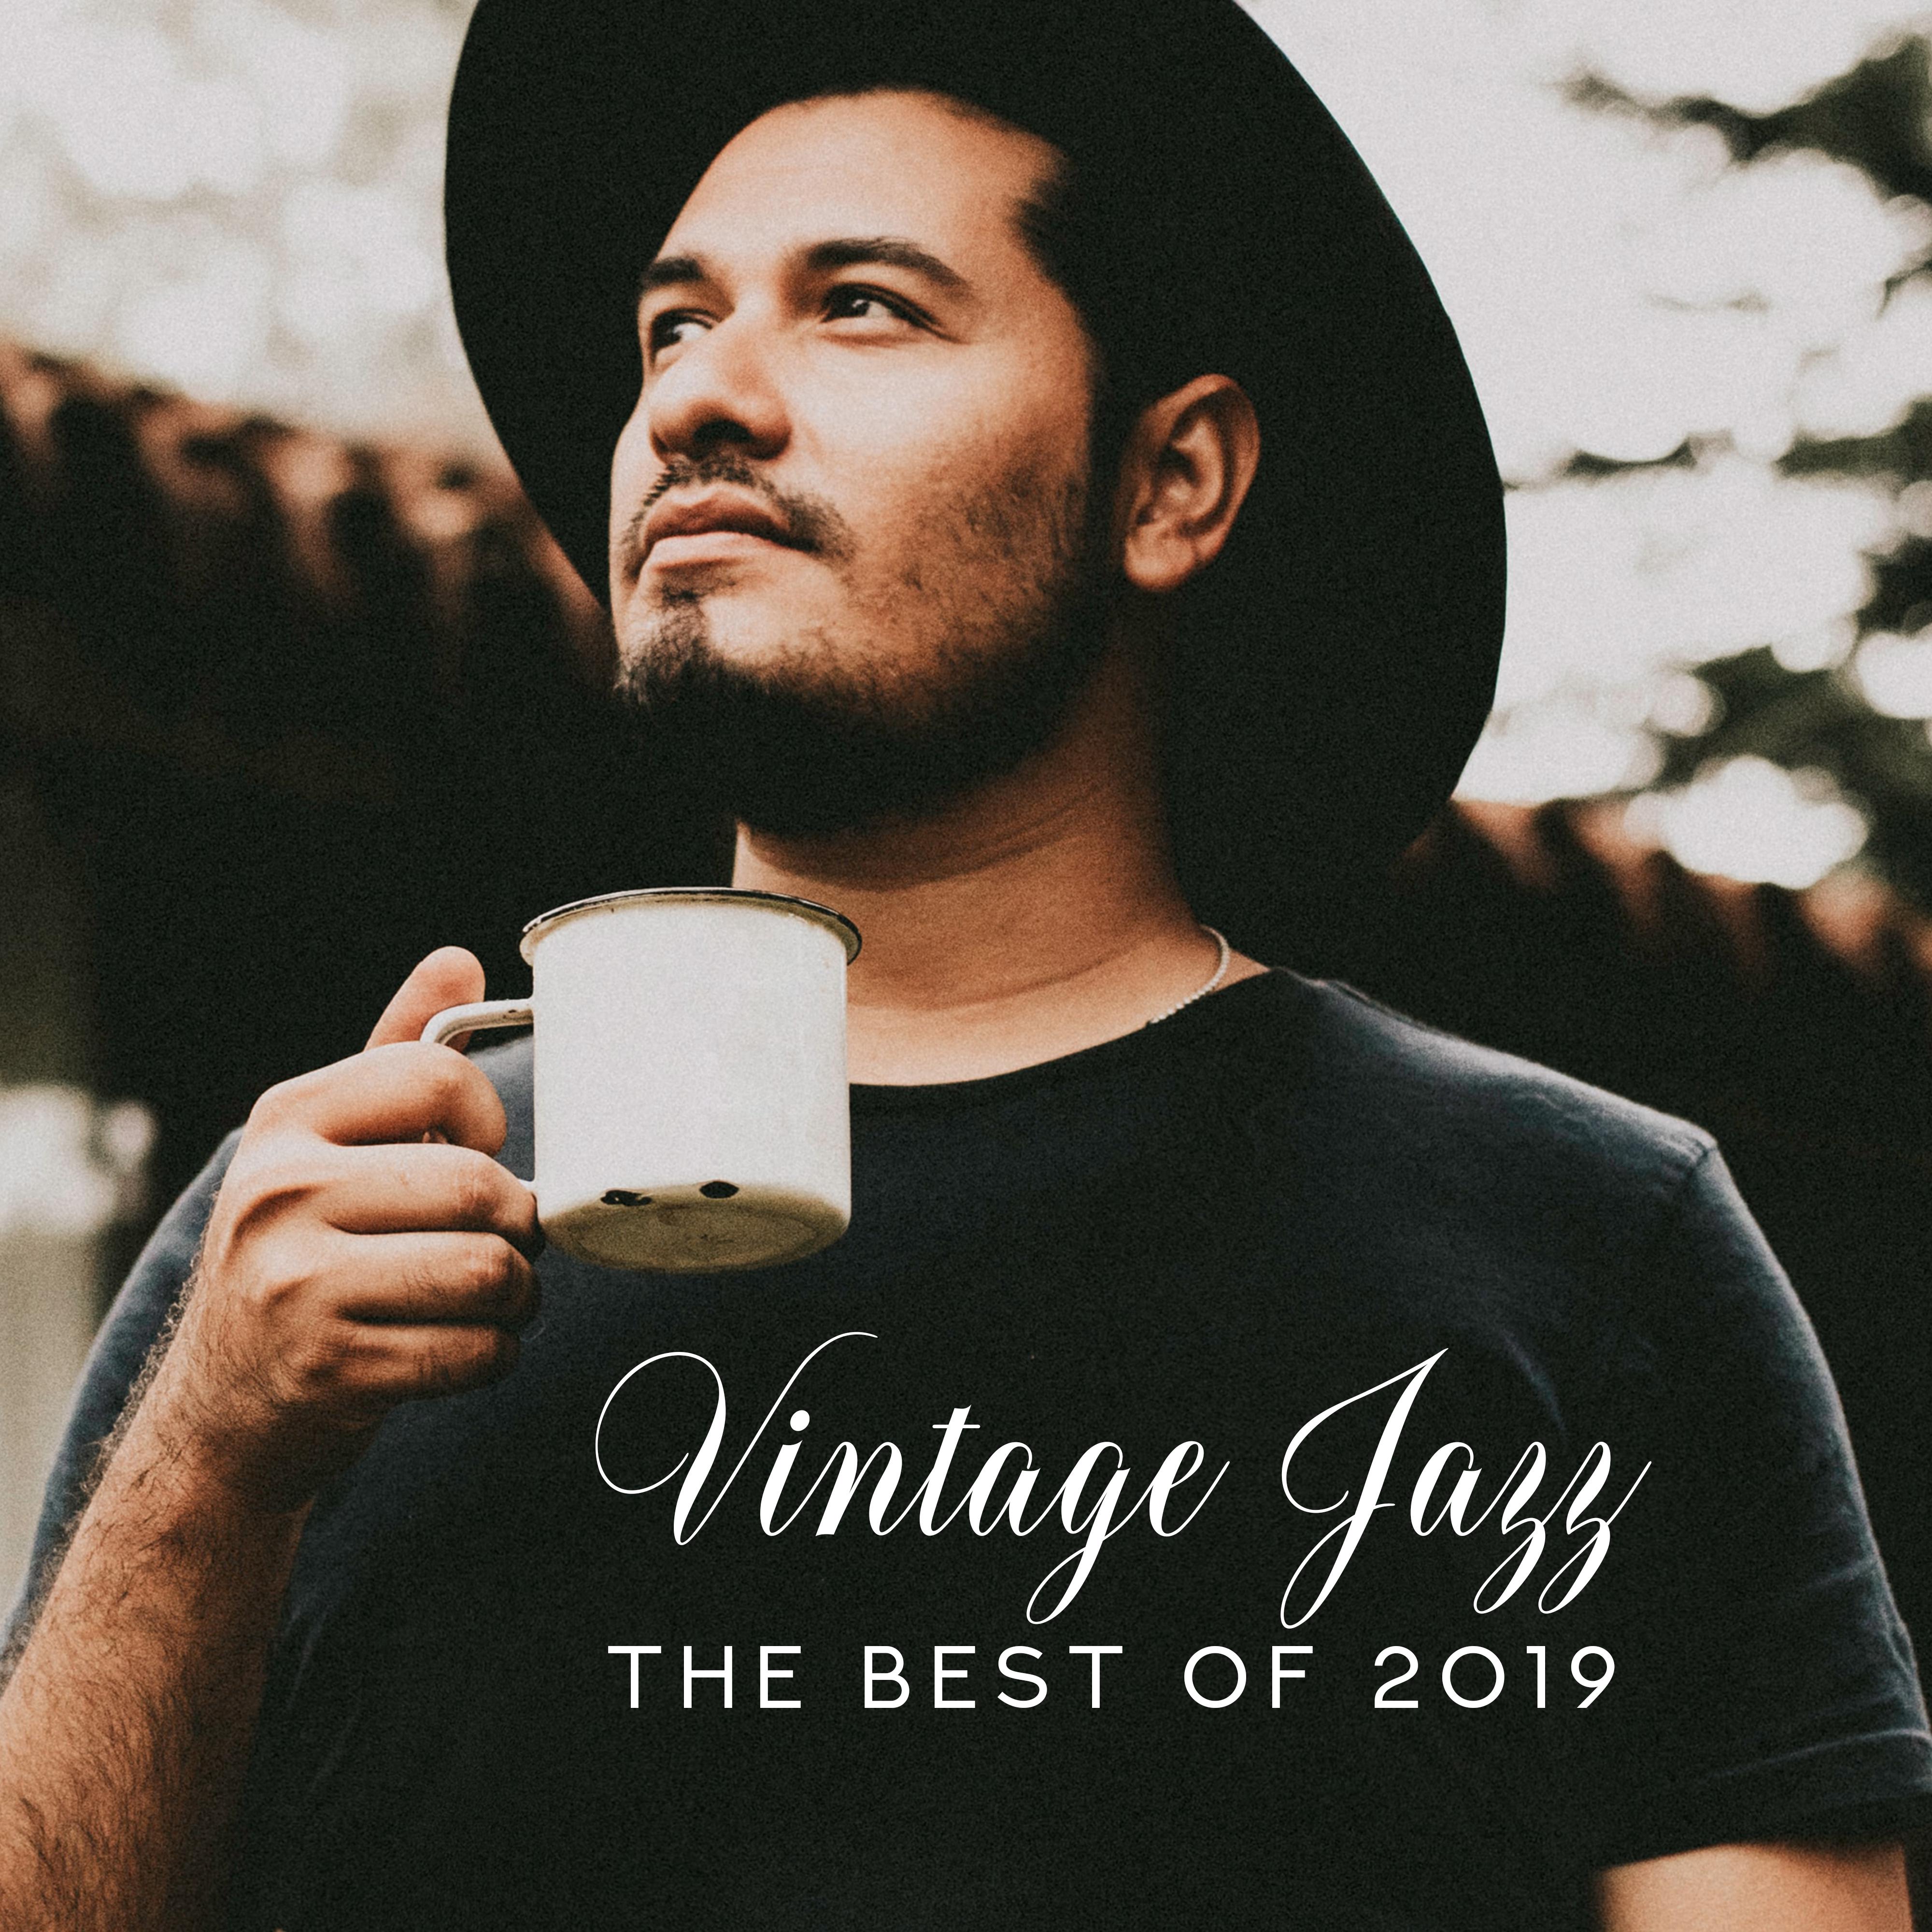 Vintage Jazz  The Best of 2019: Compilation of Best Swing Instrumental Jazz Music, Happy Vintage Songs for Oldschool Dance Party, Mesmerizing Sounds of Piano, Contrabass, Sax  More